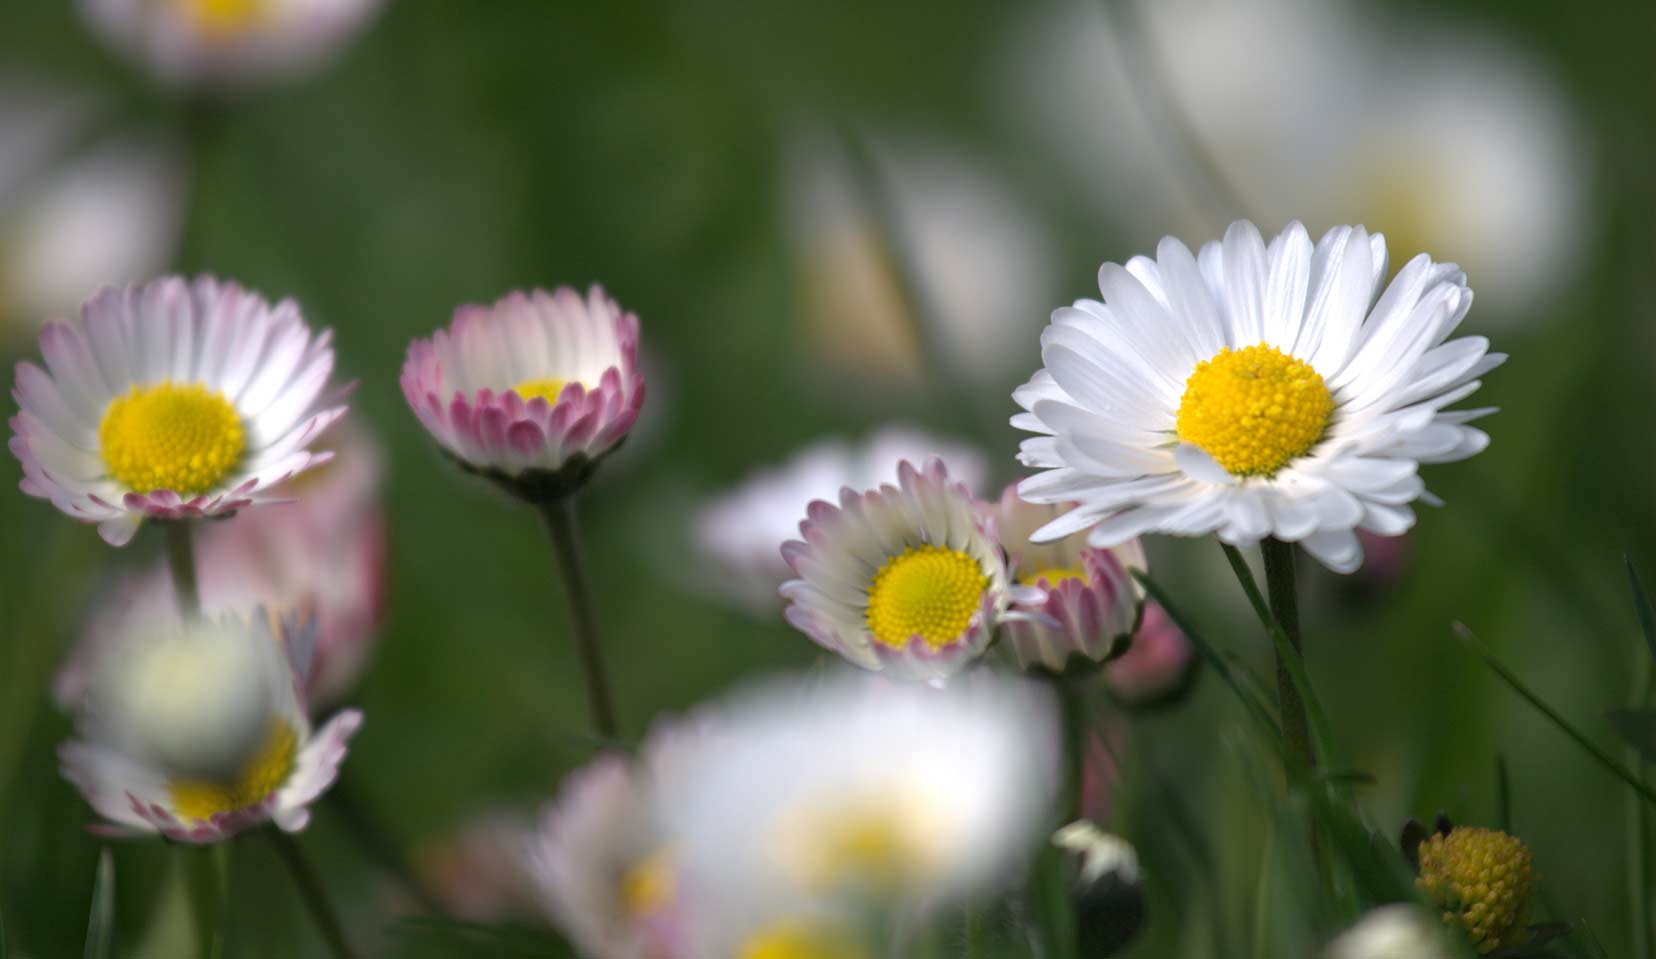 Daisy Bellis Perennis L Daisy Family Asteraceae Organic And Natural Skin Care Dr Hauschka Skin Care